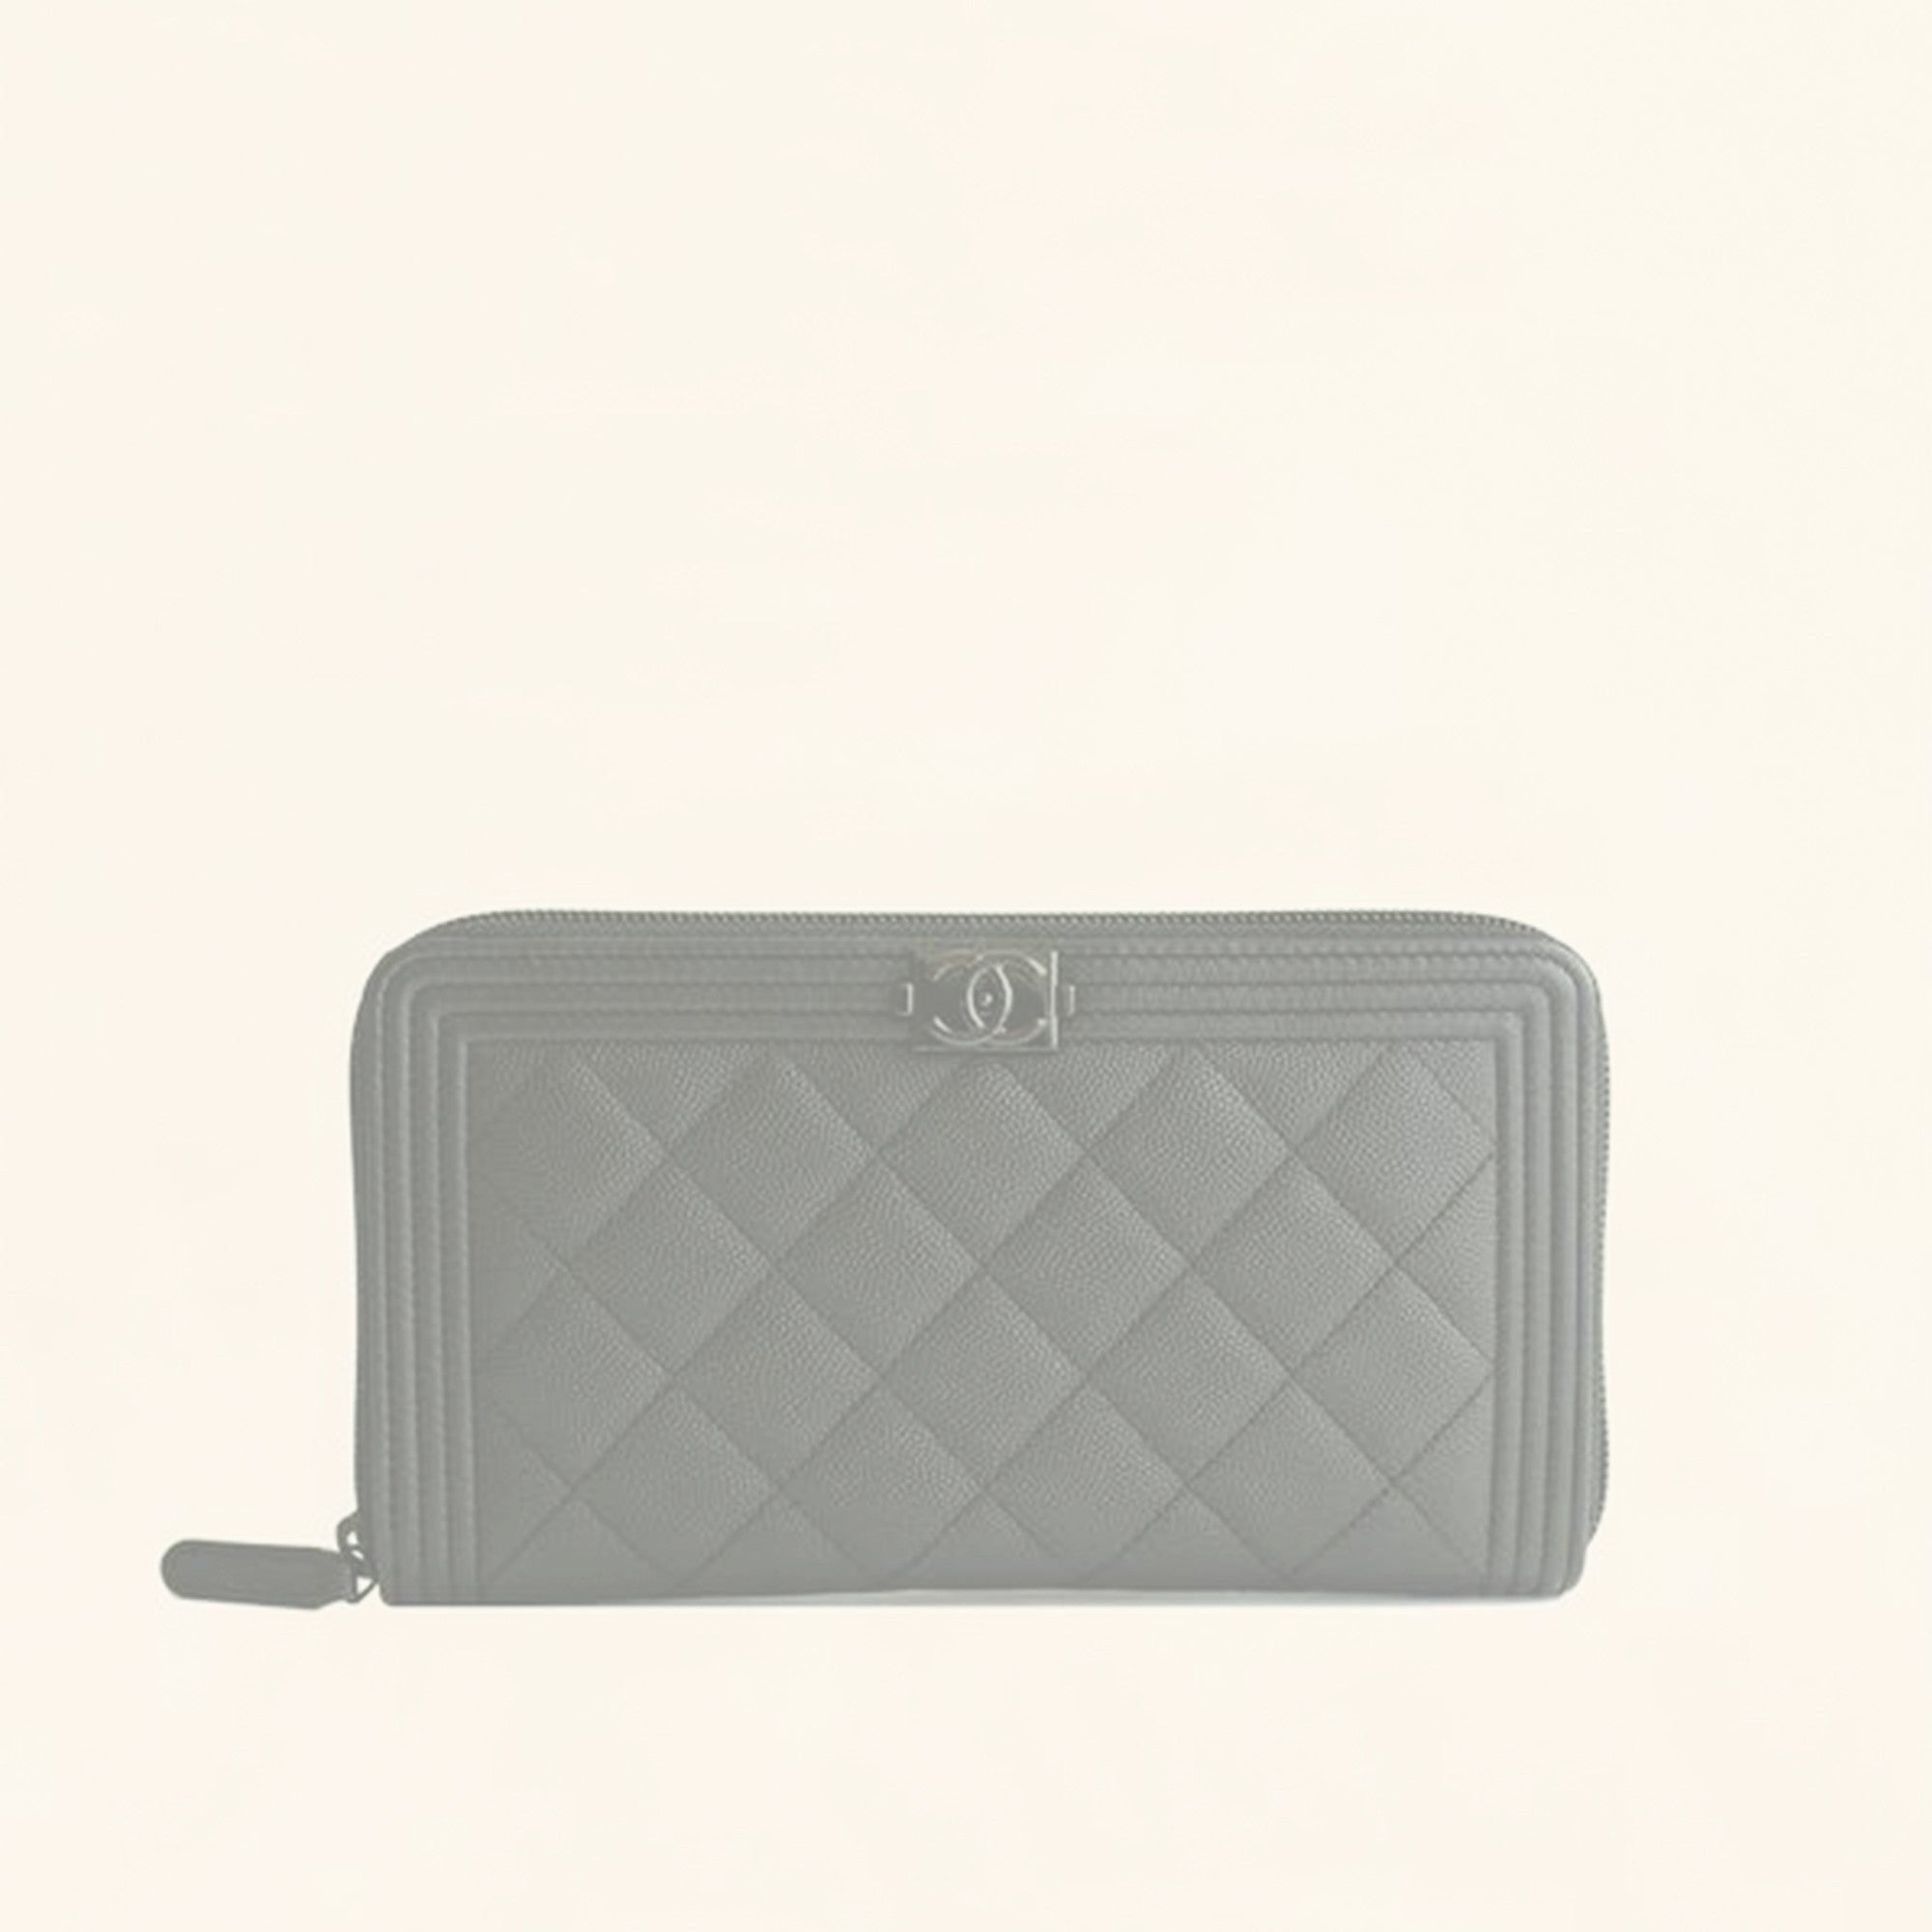 chanel phone wallet case